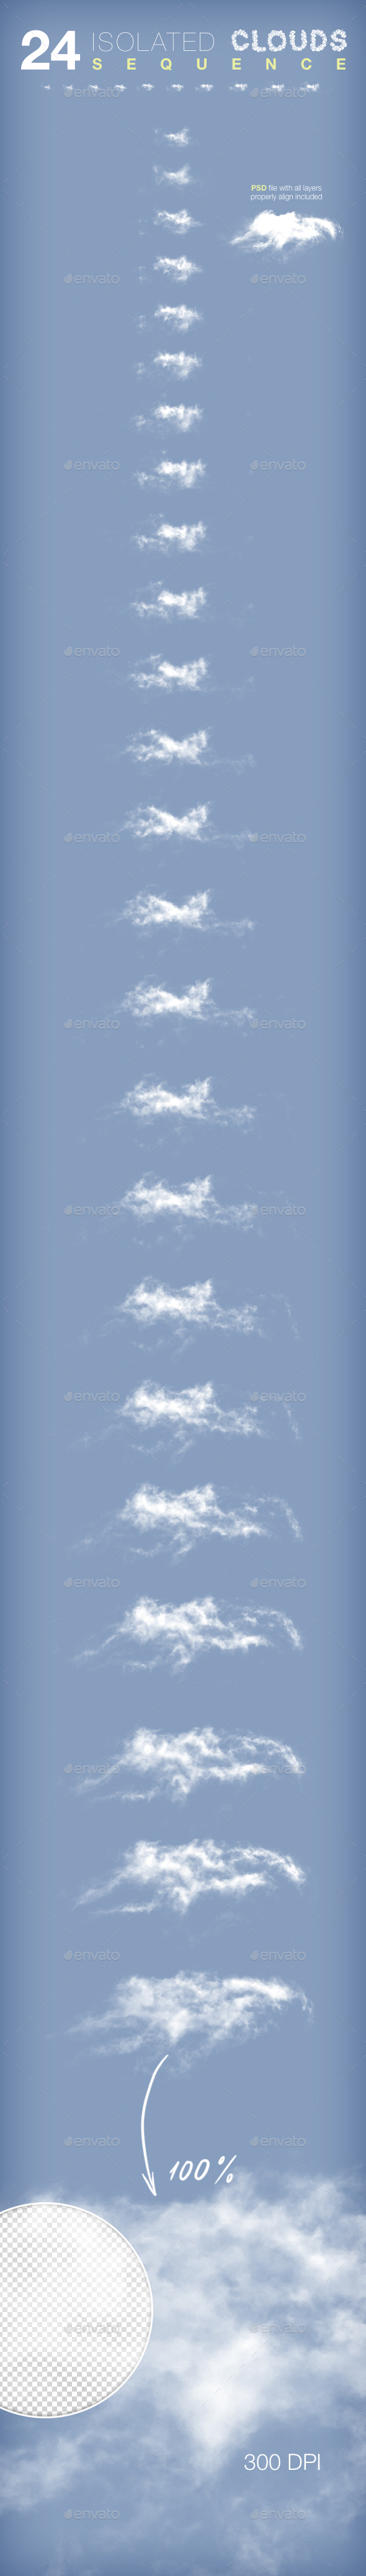 Isolated Clouds Sequence